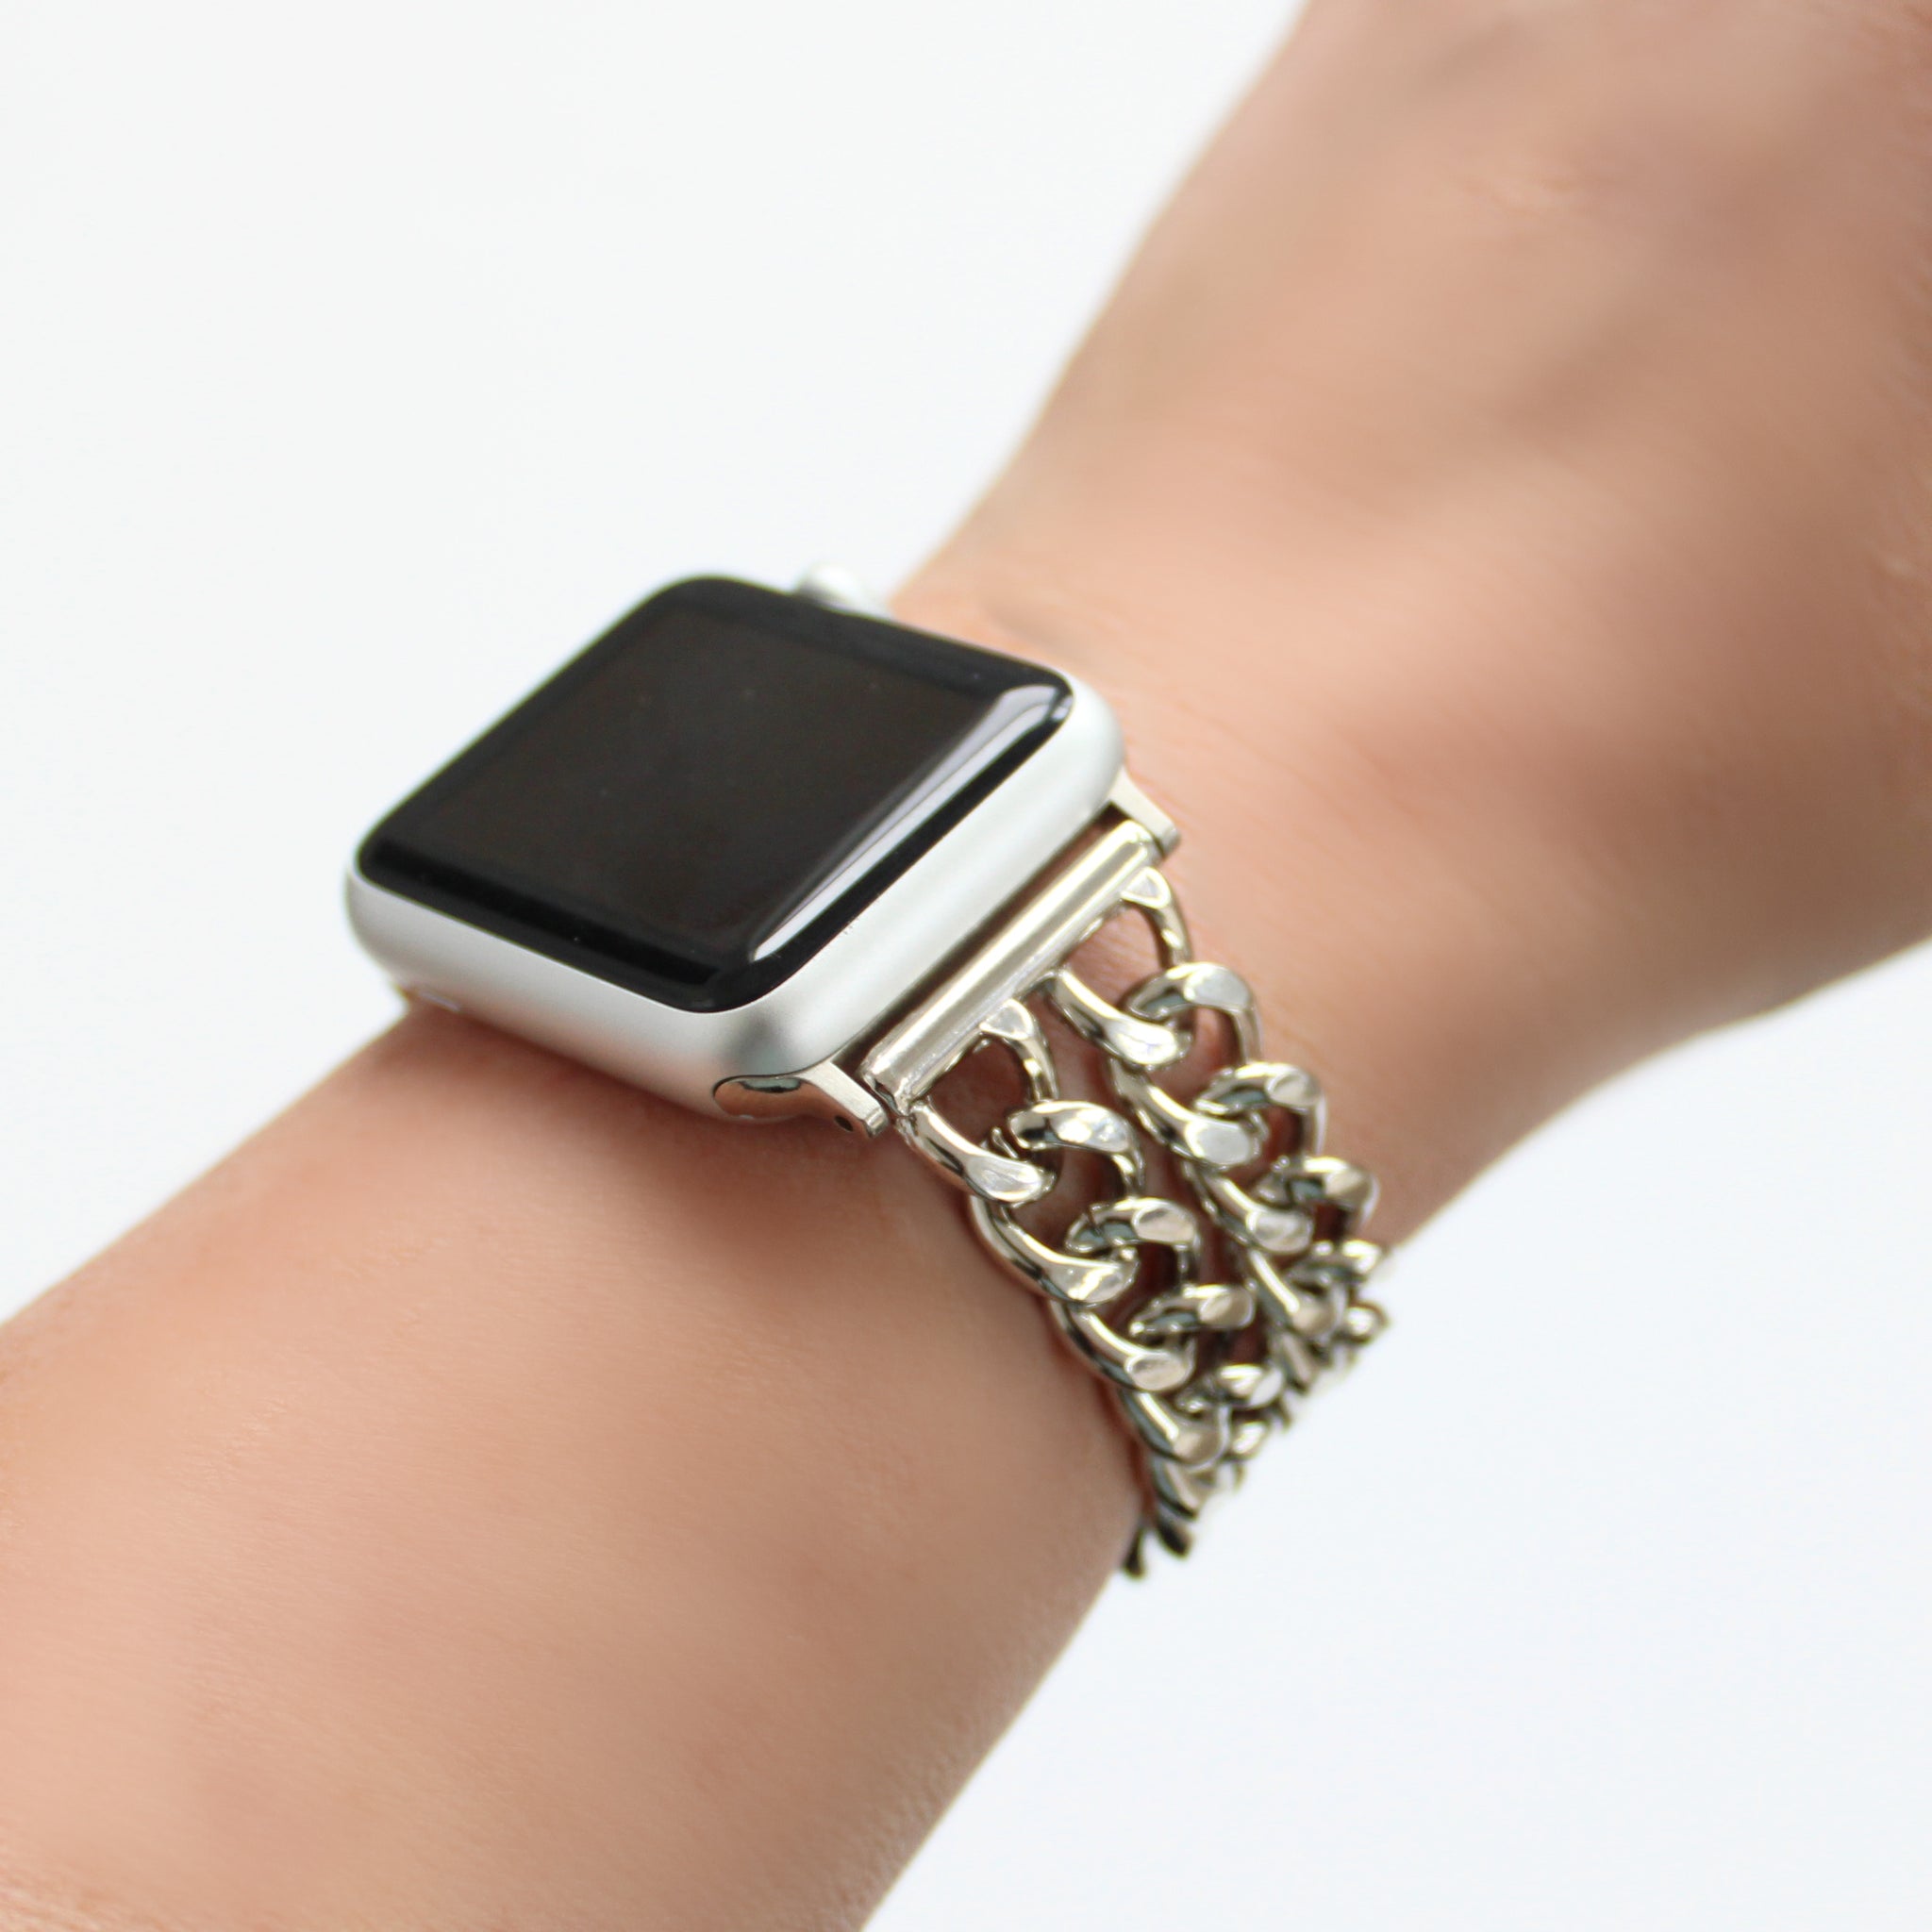 Stainless Steel Chain-Link Watch, SILVER